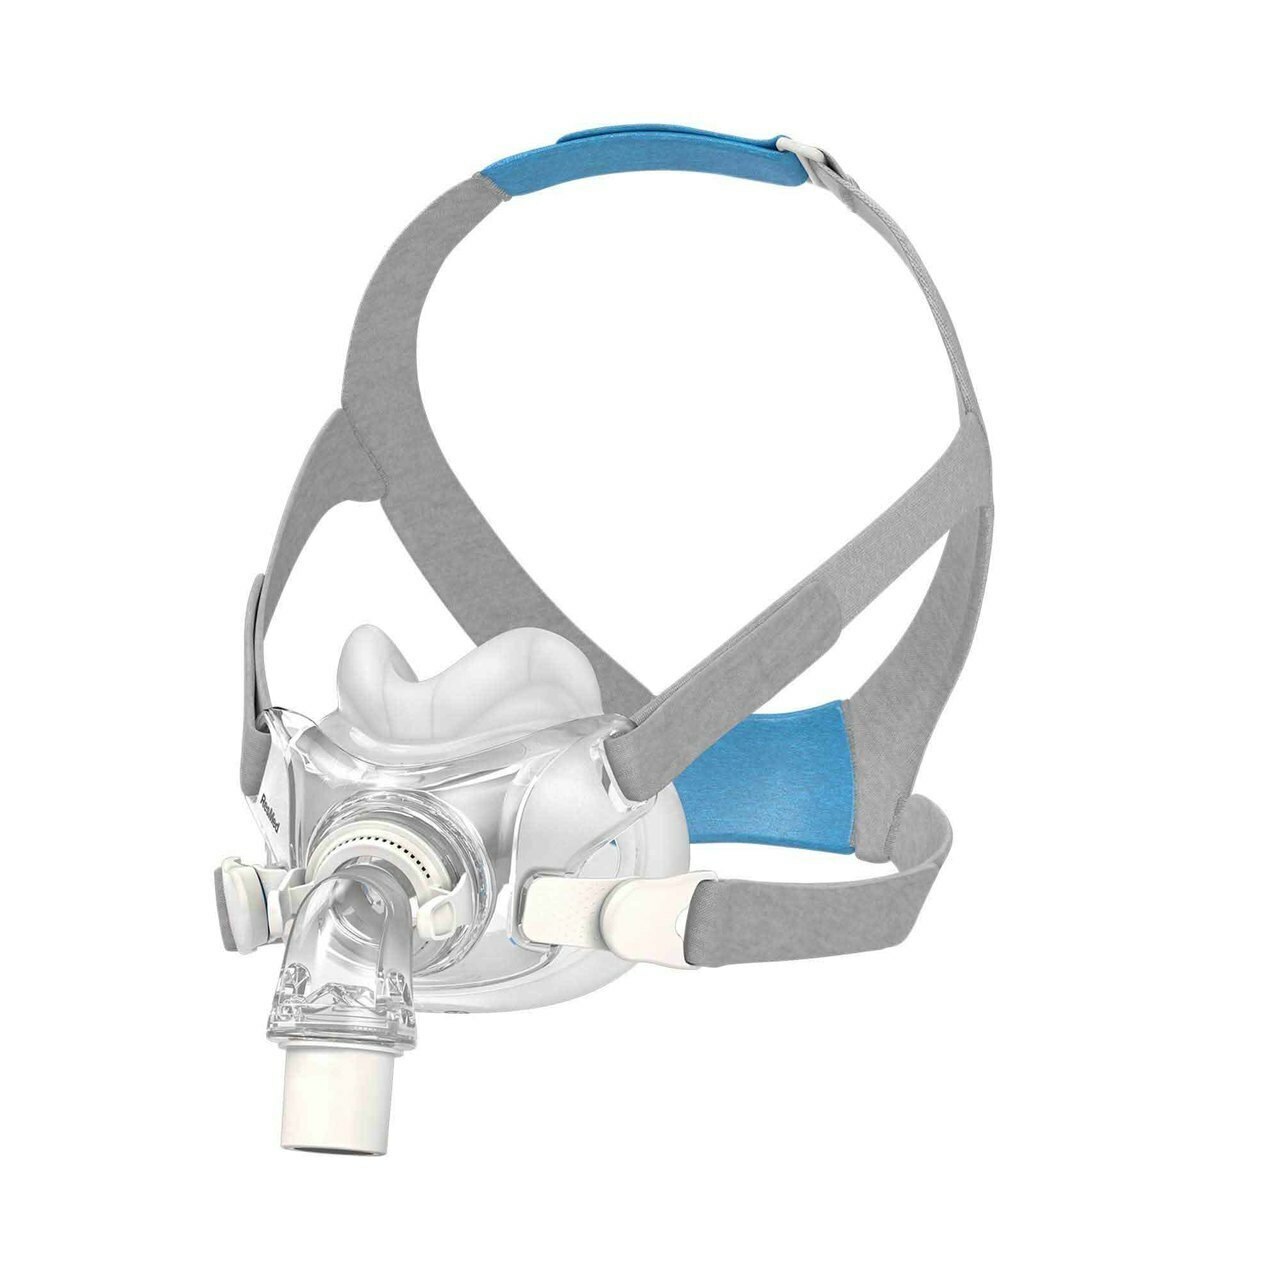 ResMed AirFit F30 CPAP Full Face Mask User Manual